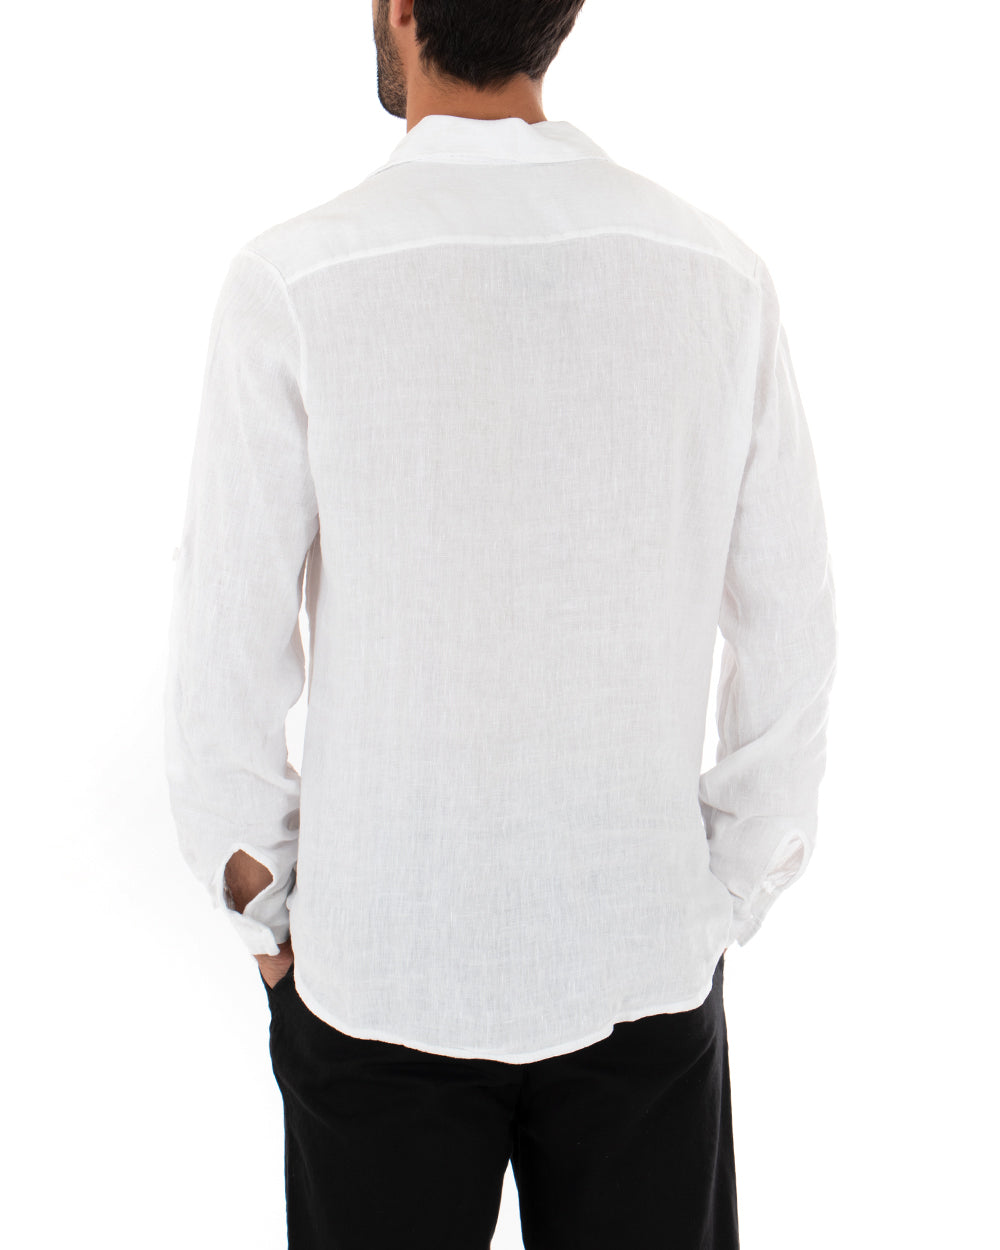 Men's Shirt With Collar Long Sleeve Linen Solid Color White GIOSAL-C1991A